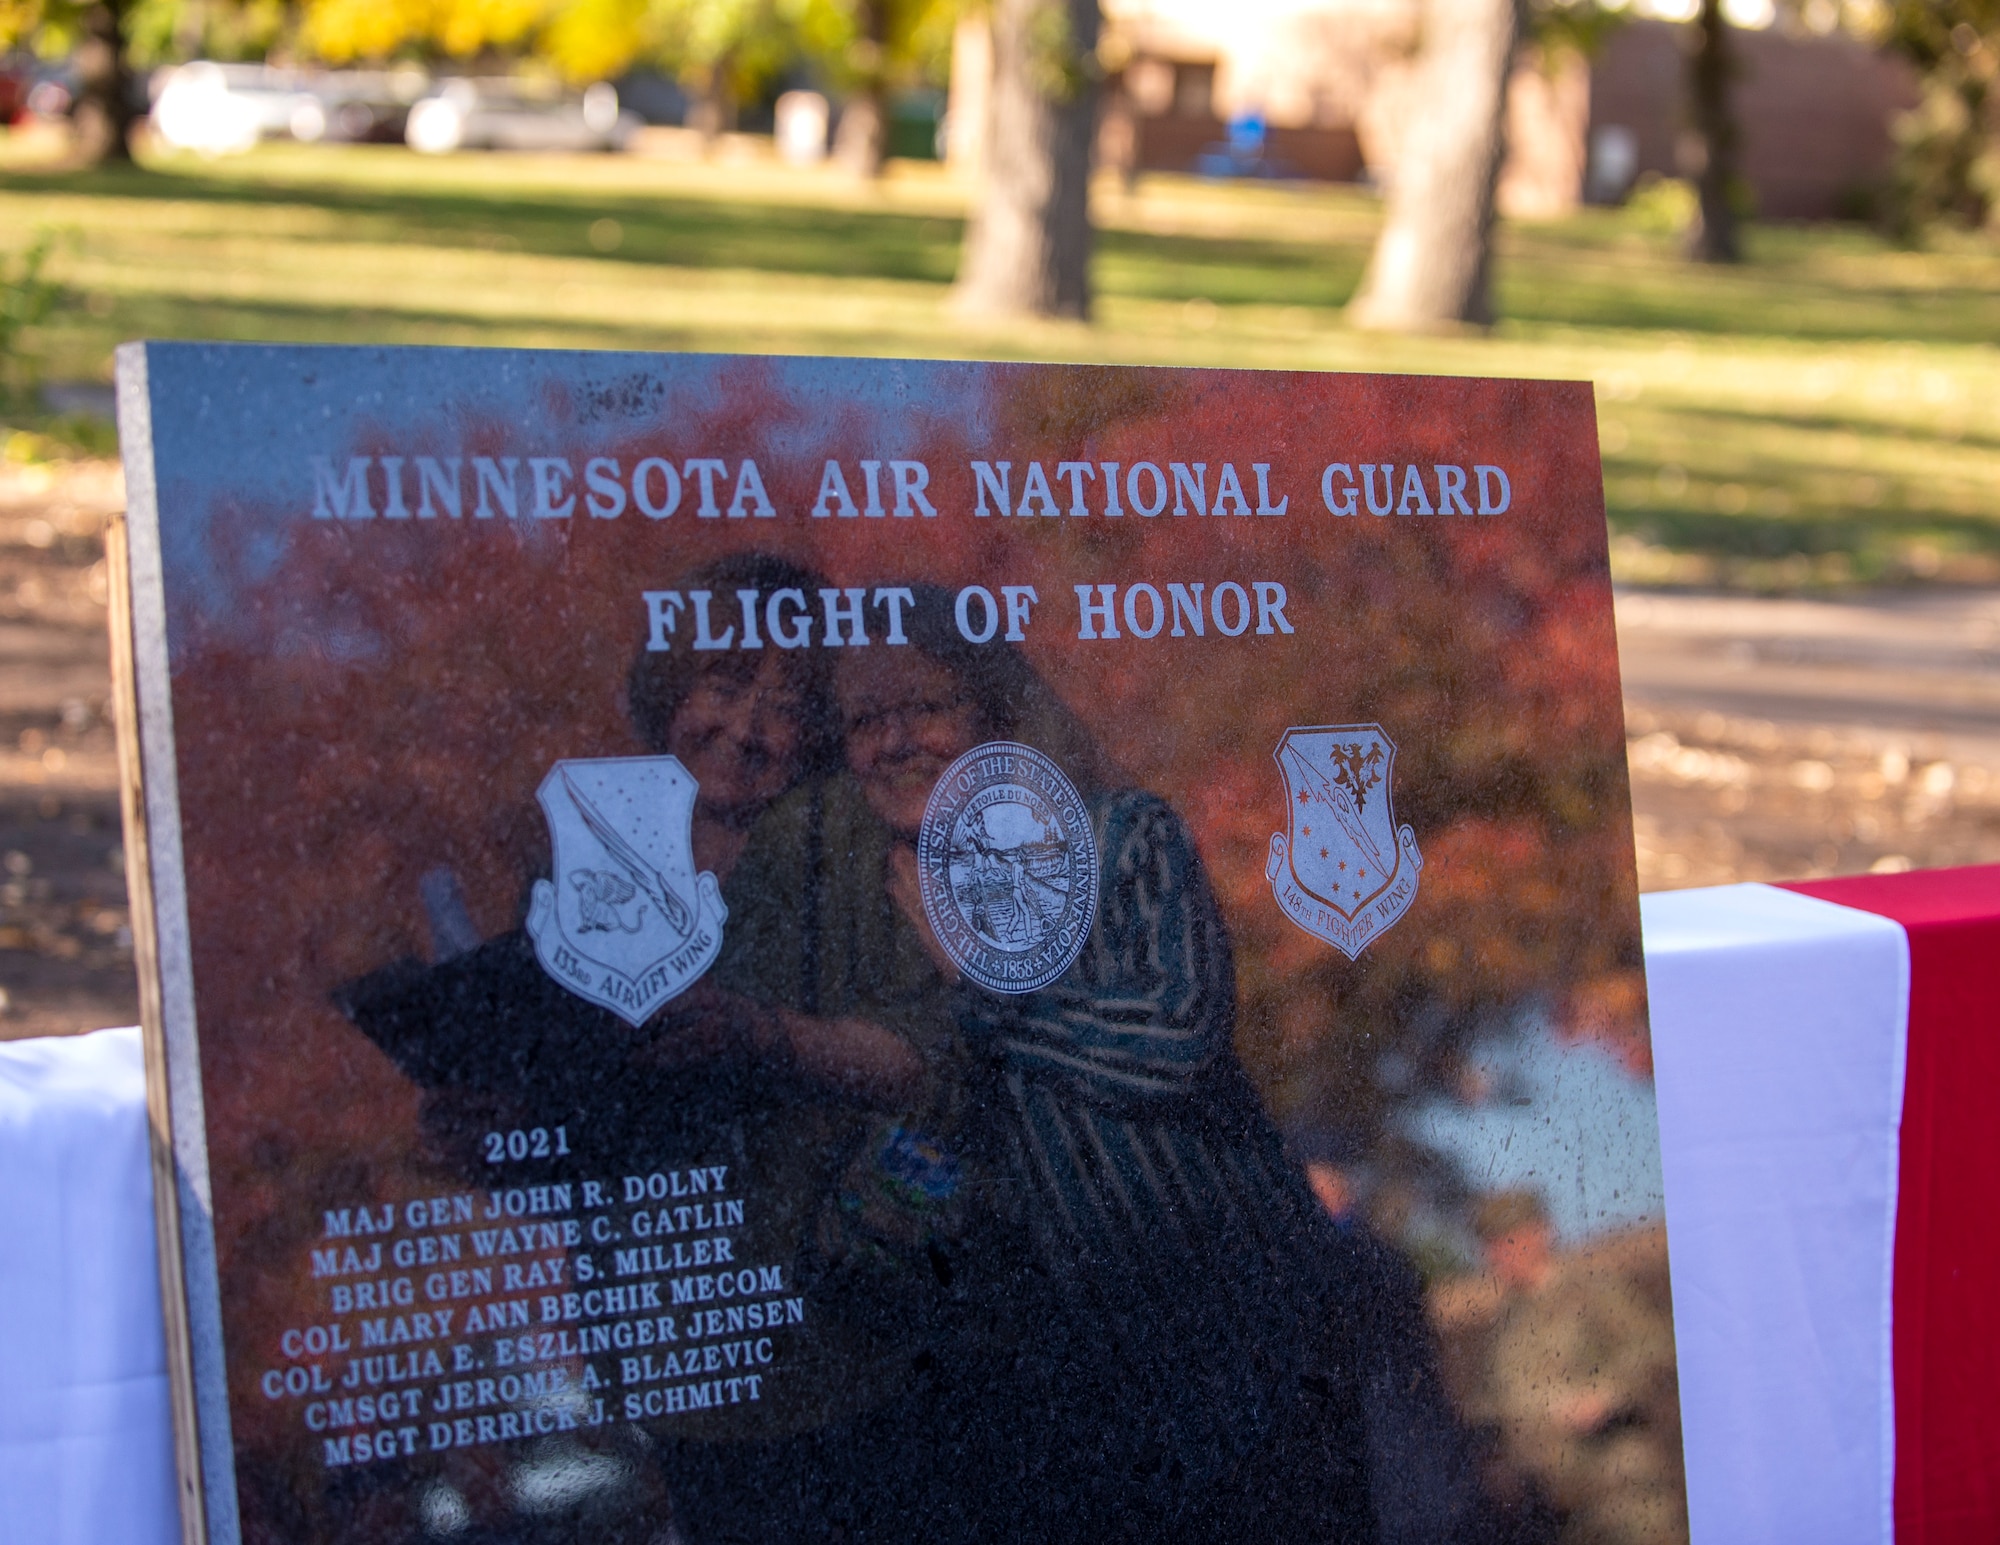 Family members for the Minnesota Air National Guard’s Flight of Honor program look at the monument, in St. Paul, Minn., Oct. 17, 2021.